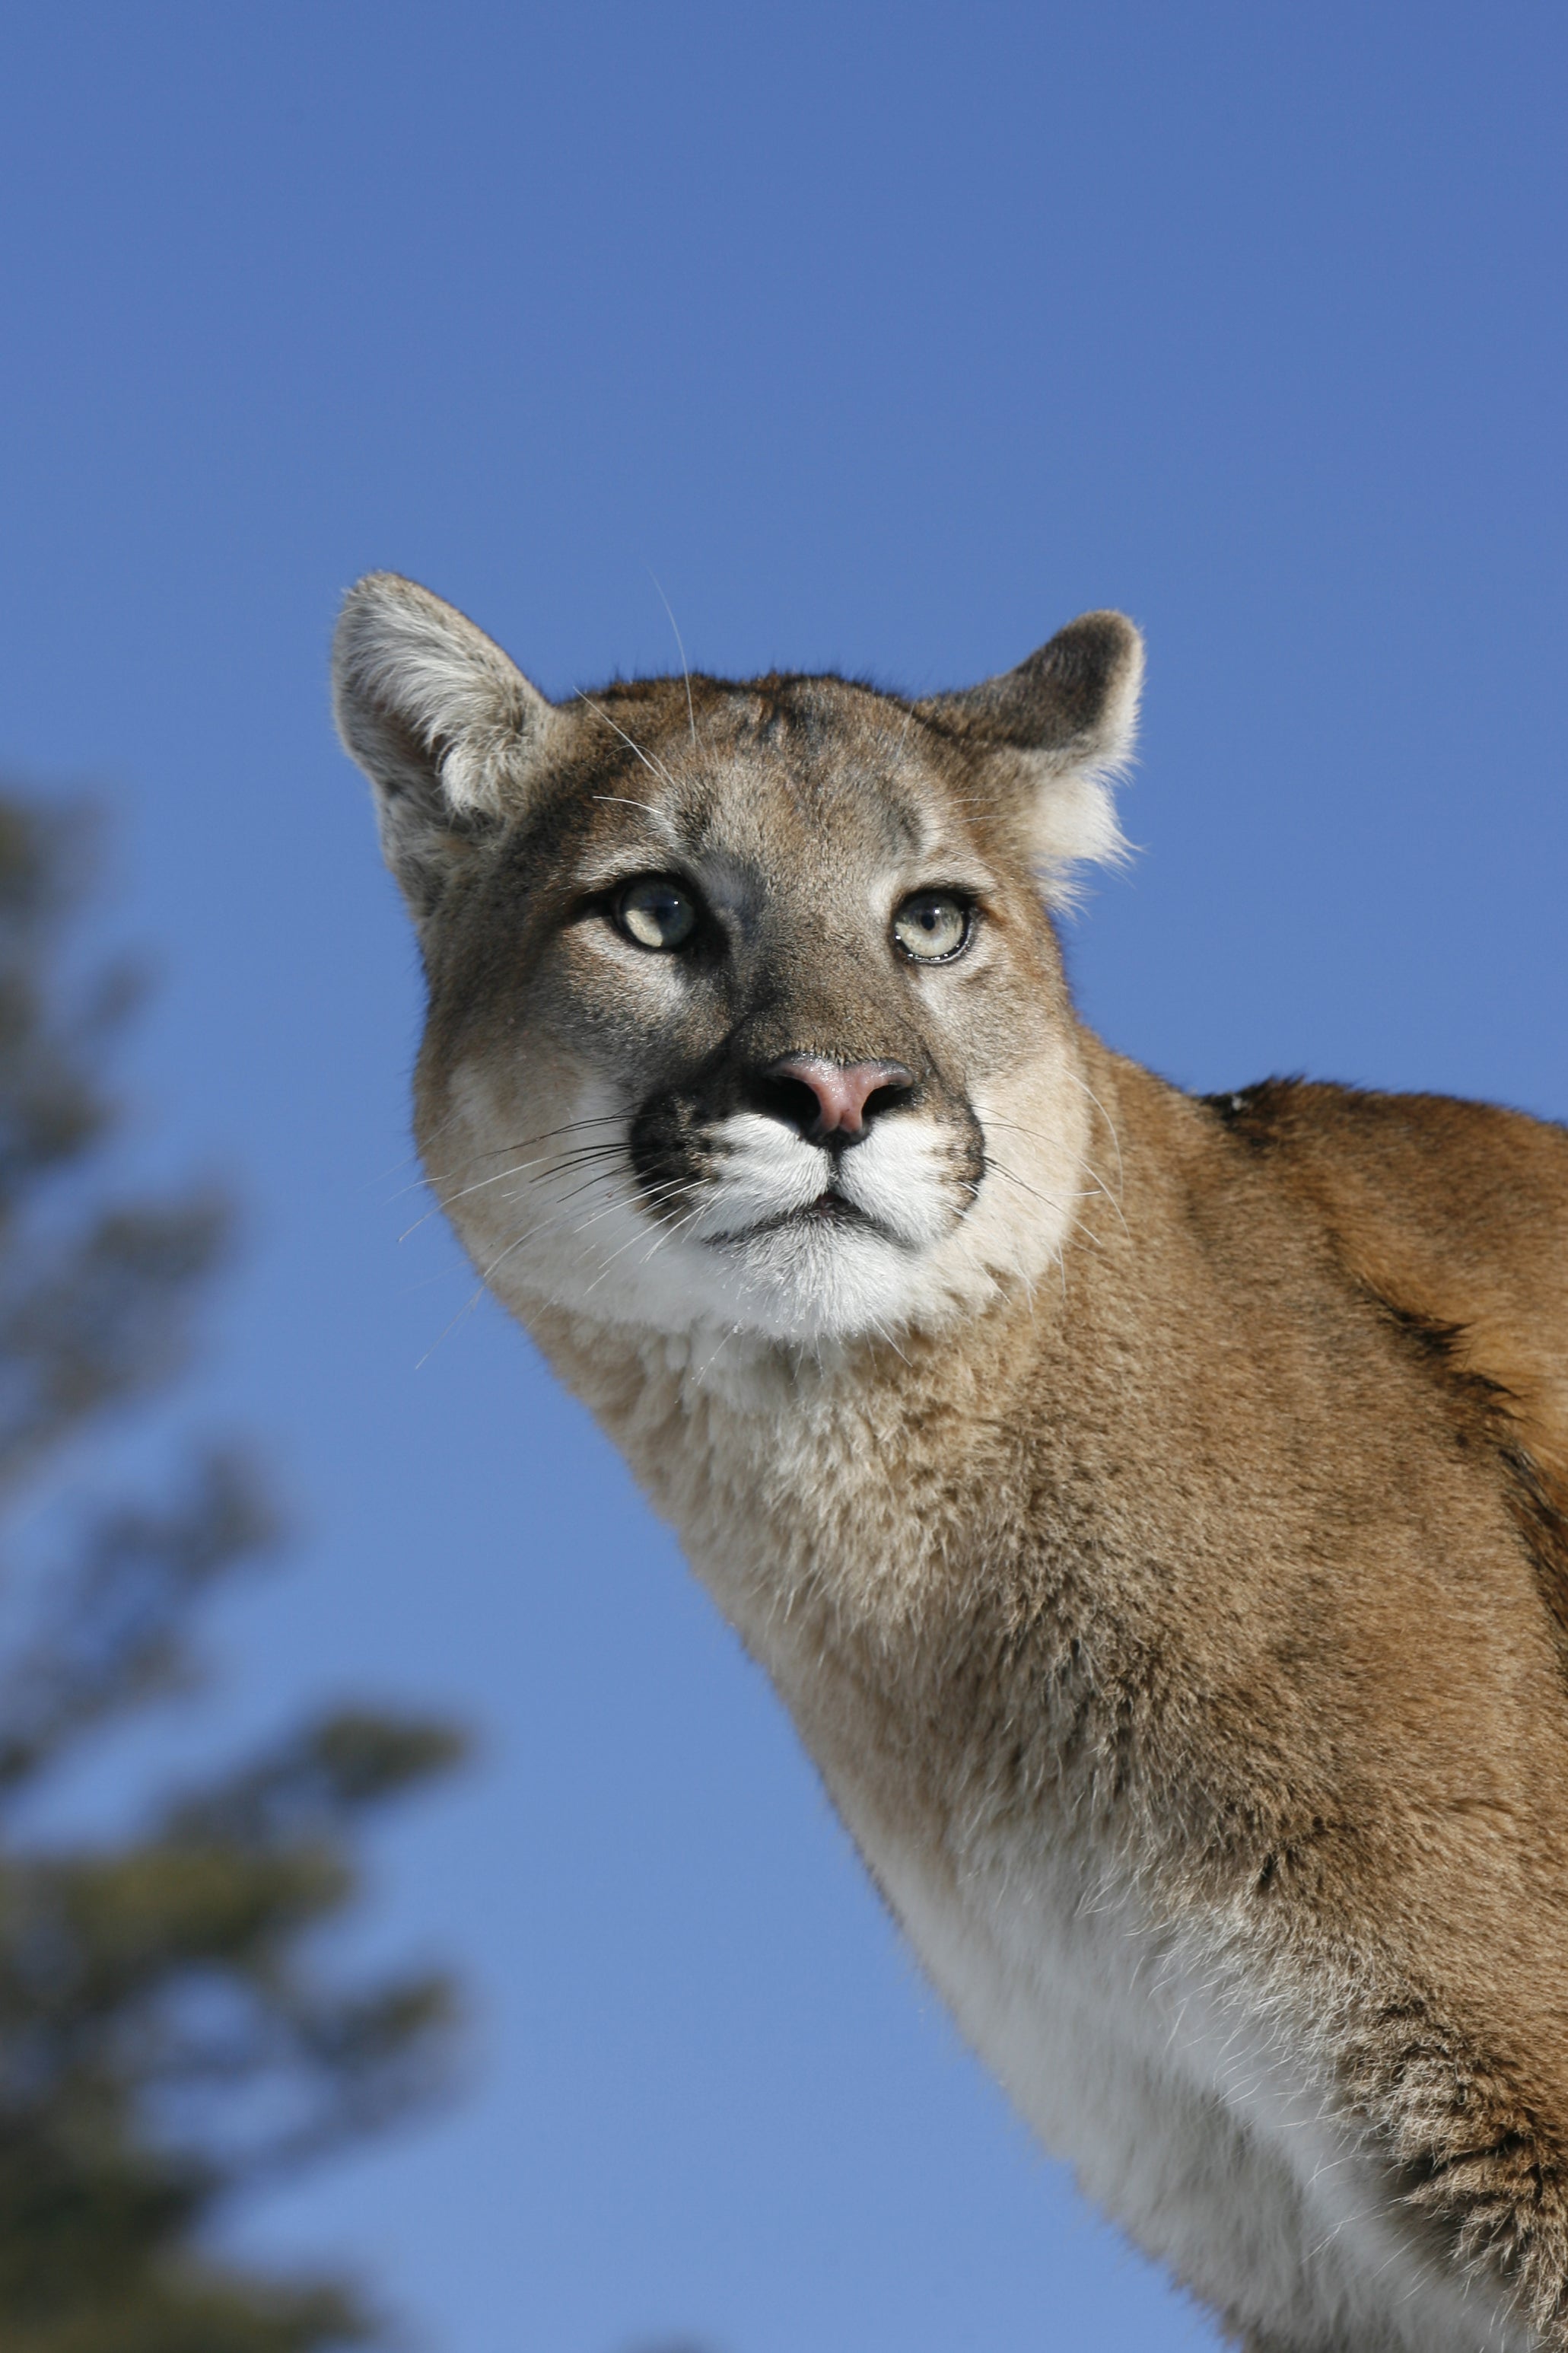 The mountain lion attacked a southern Idaho family and snatched their family dog, wildlife officials have said.